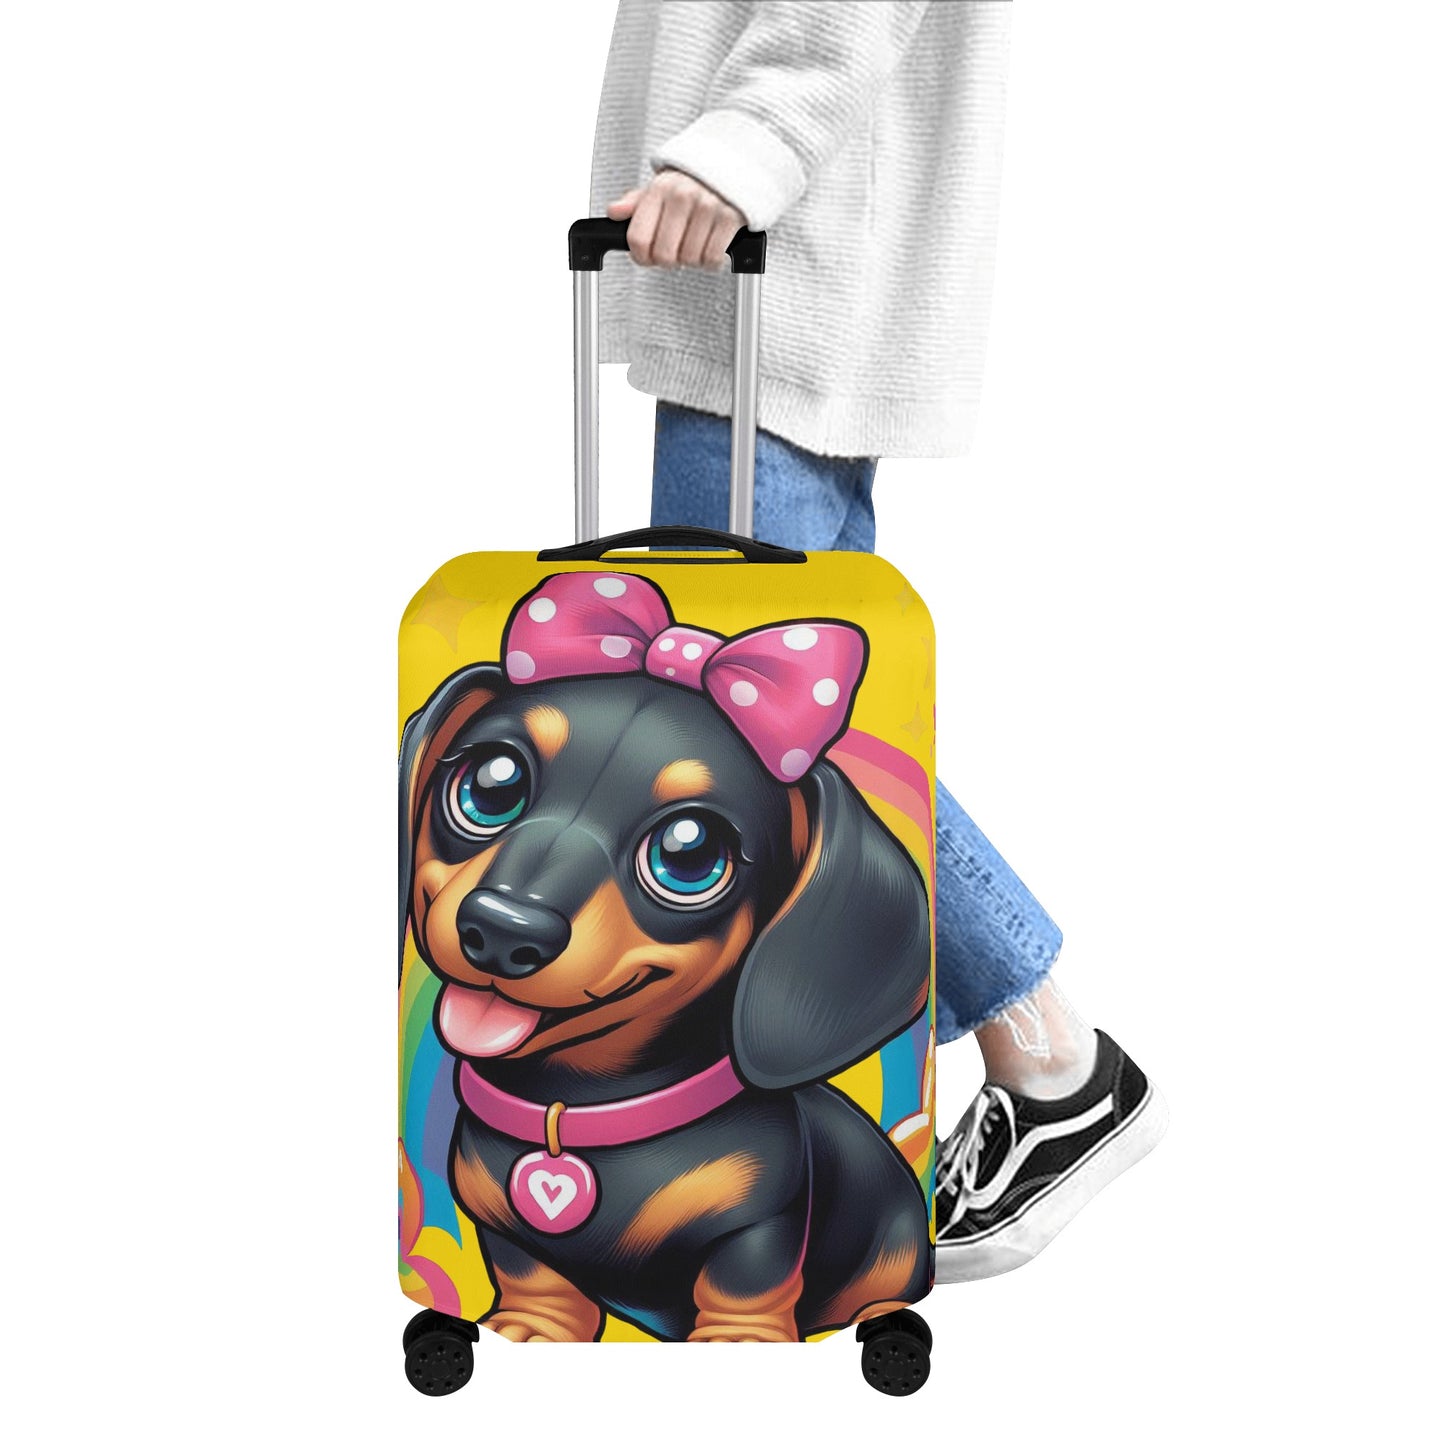 Cappy - Luggage Cover